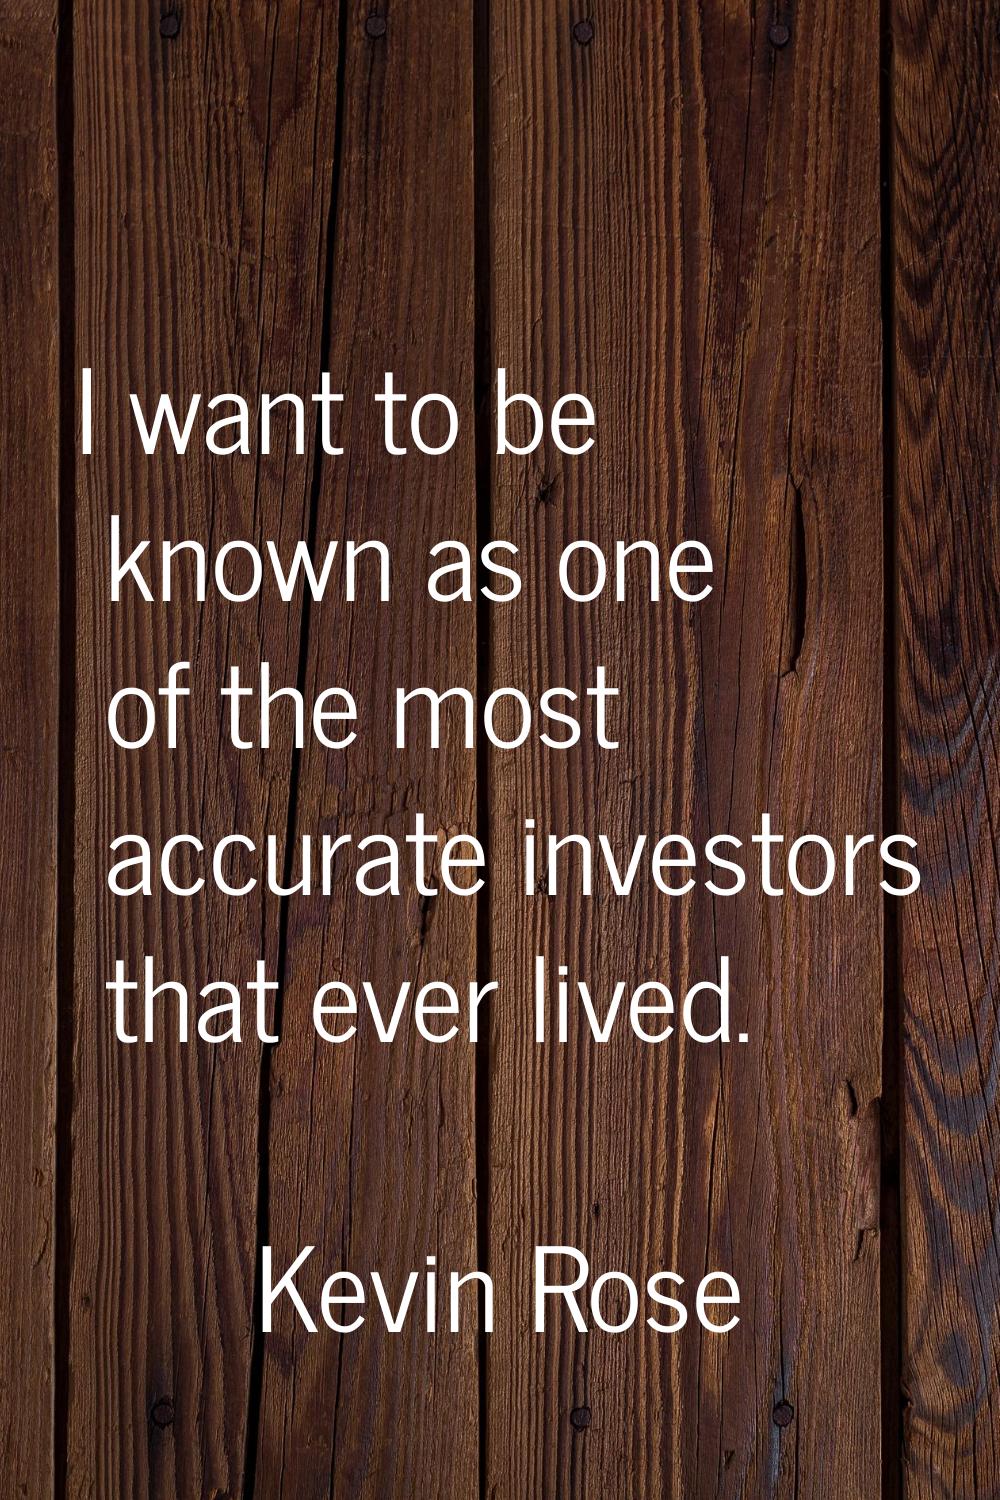 I want to be known as one of the most accurate investors that ever lived.